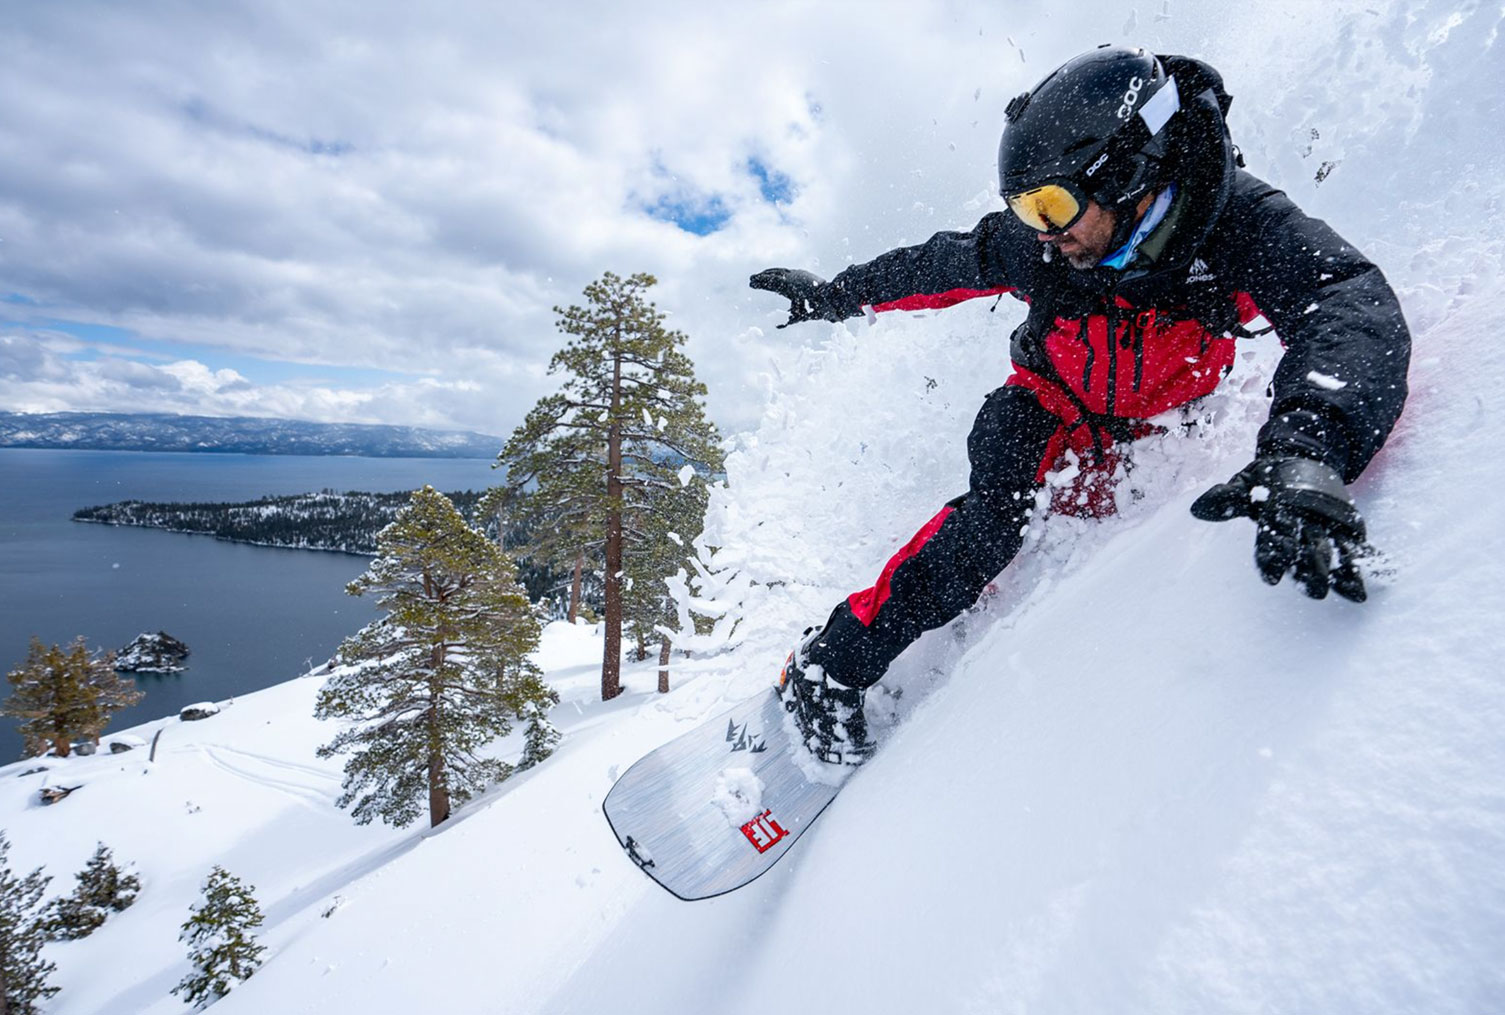 Skis in Vancouver | Snowboarding in Vancouver | Skis Rental in Vancouver | Snowboard Rental in Vancouver | Snow Clothes in Vancouver | Snow Clothes Rentals in Vancouver